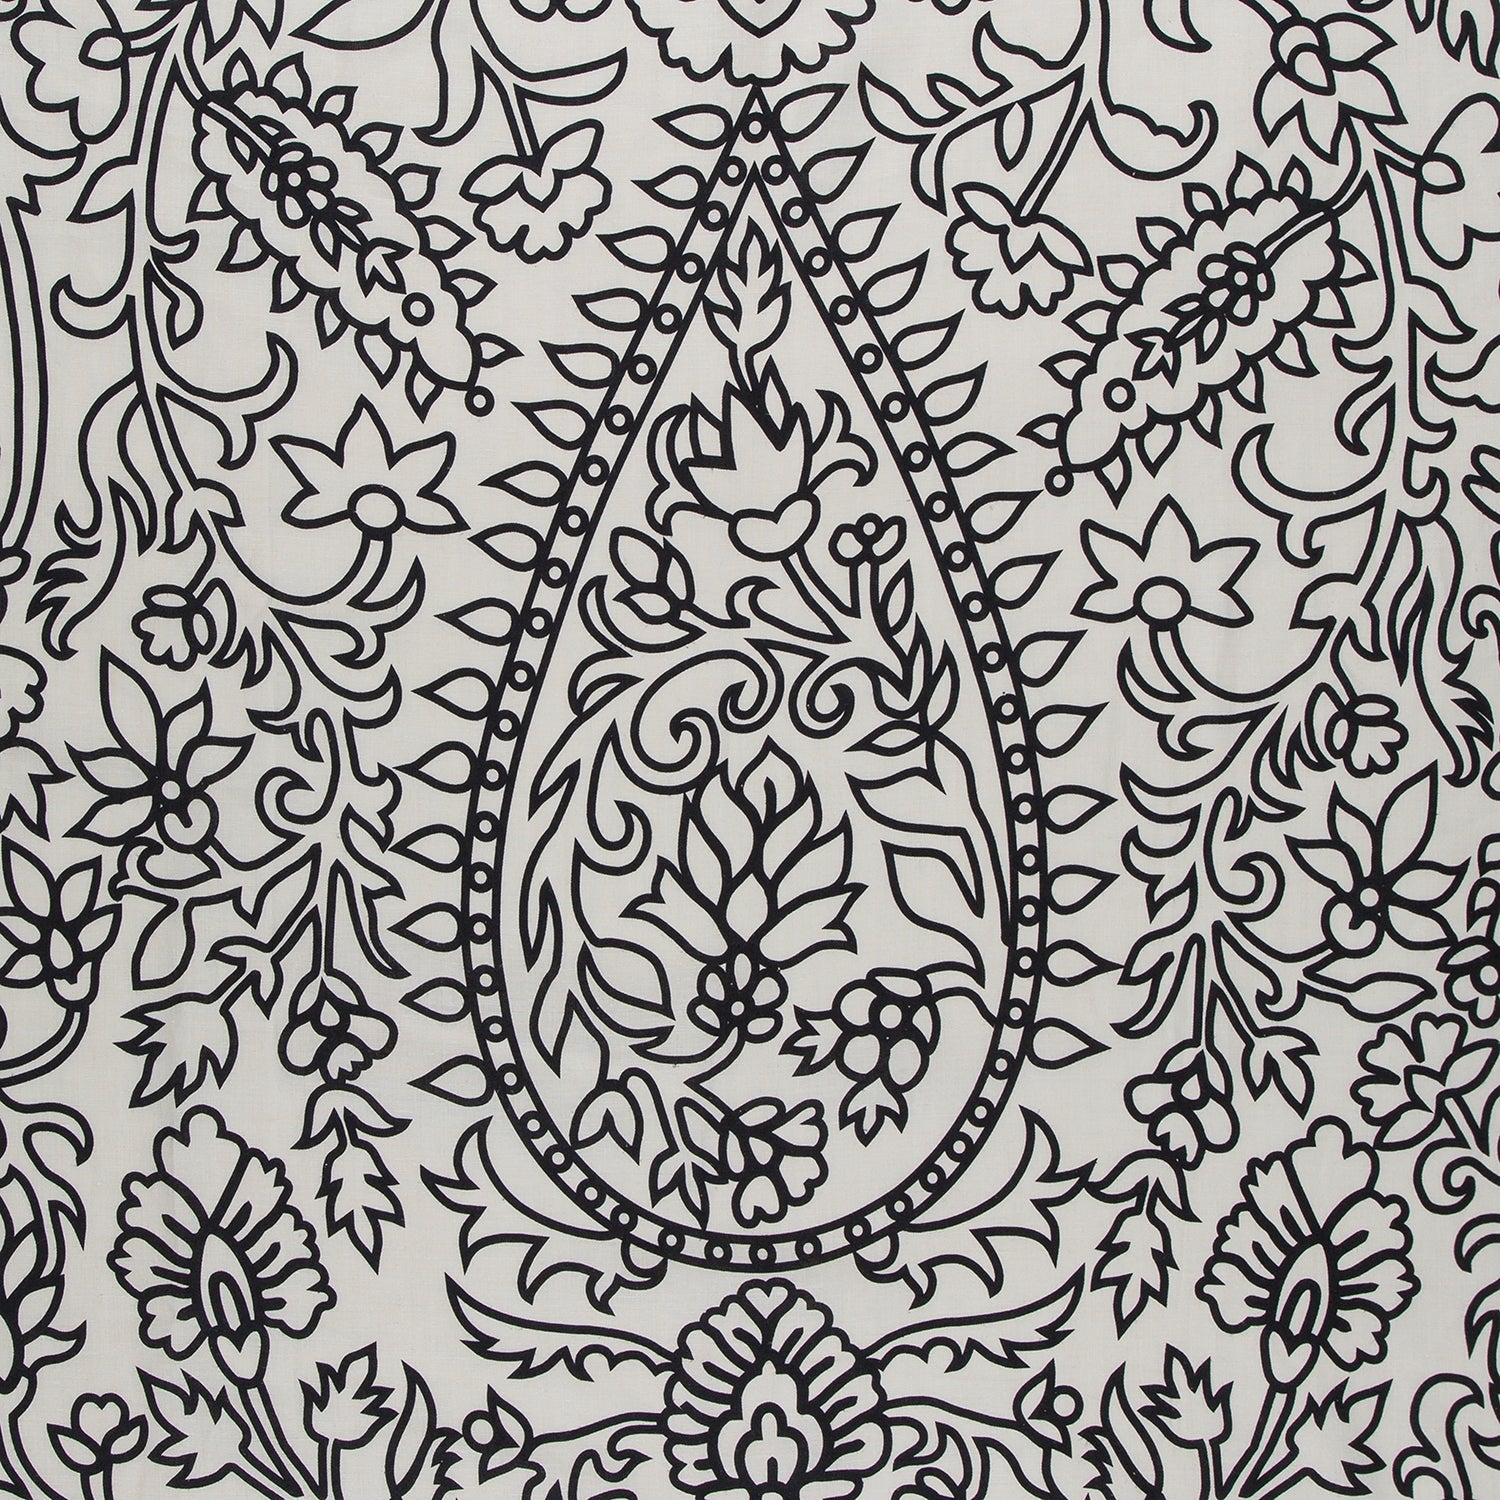 Detail of fabric in a dense paisley pattern in black on a light gray field.